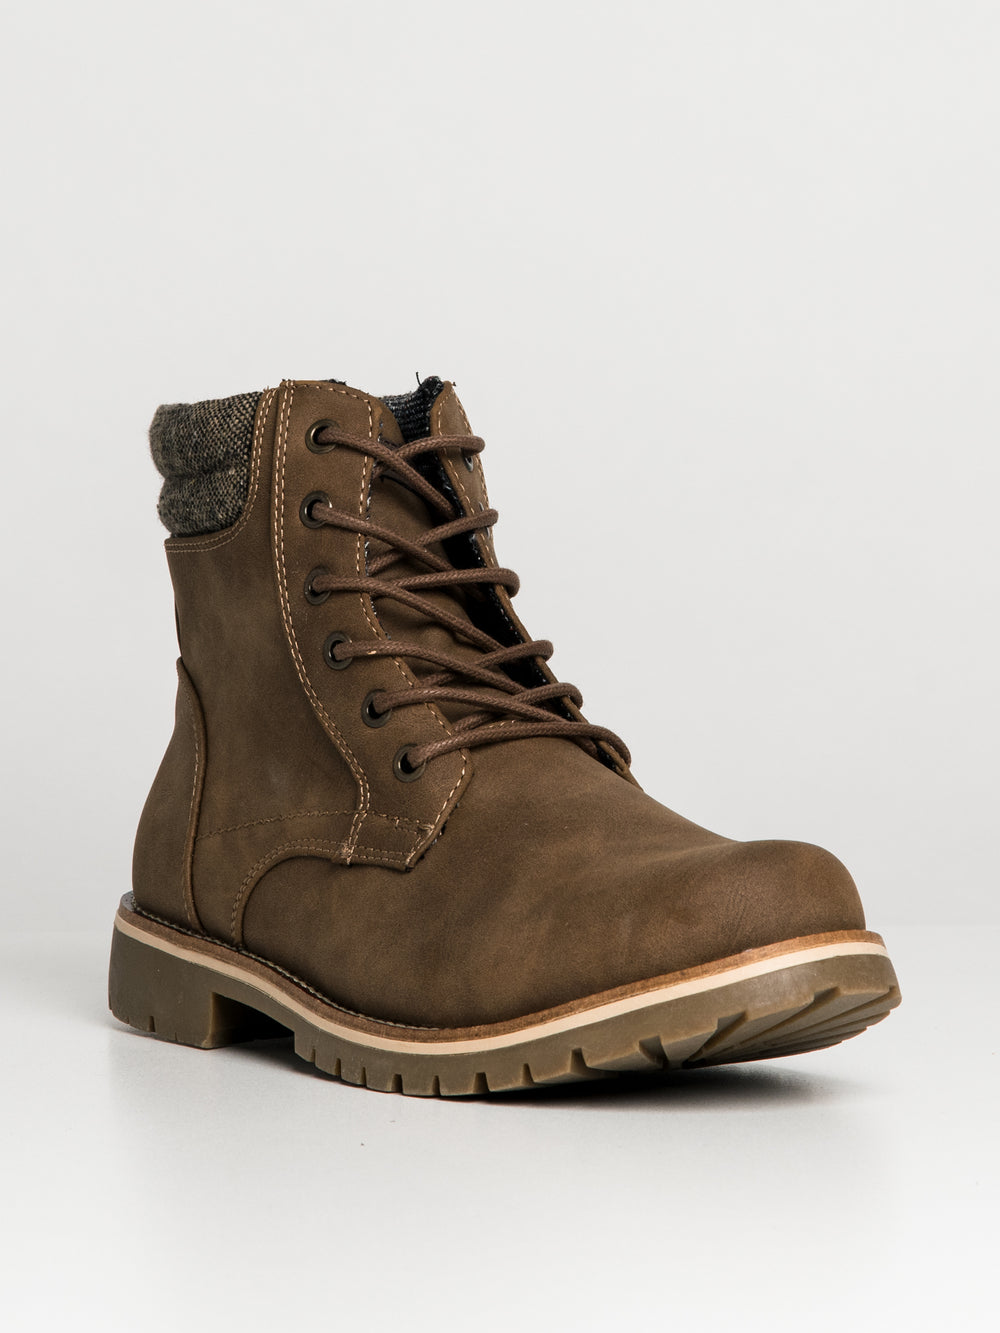 MENS BLACKWELL COLT BOOT - CLEARANCE